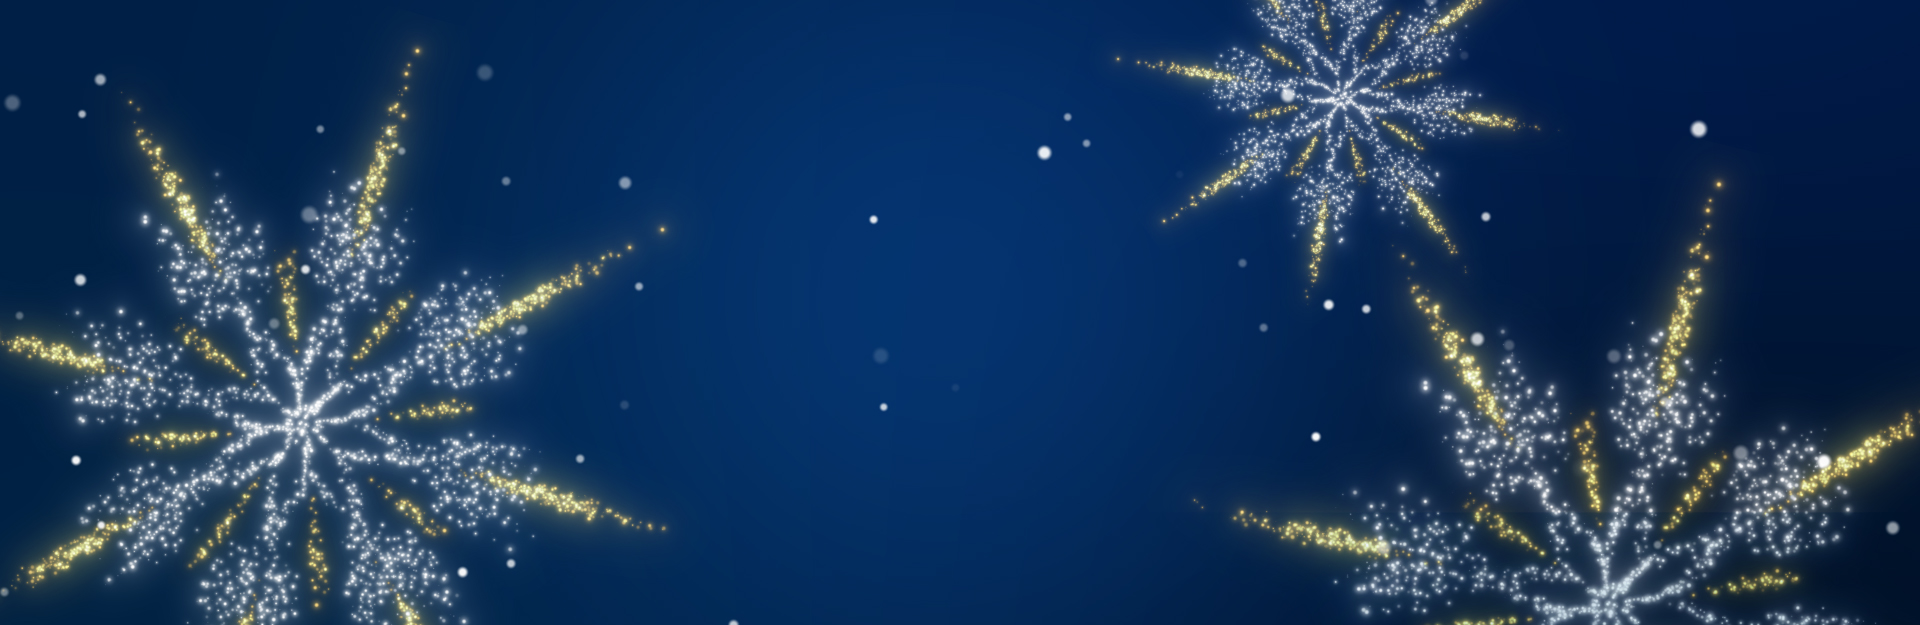 Blue and gold stars explode against blue in perfect animated Christmas greetings with text "animate your own experience"